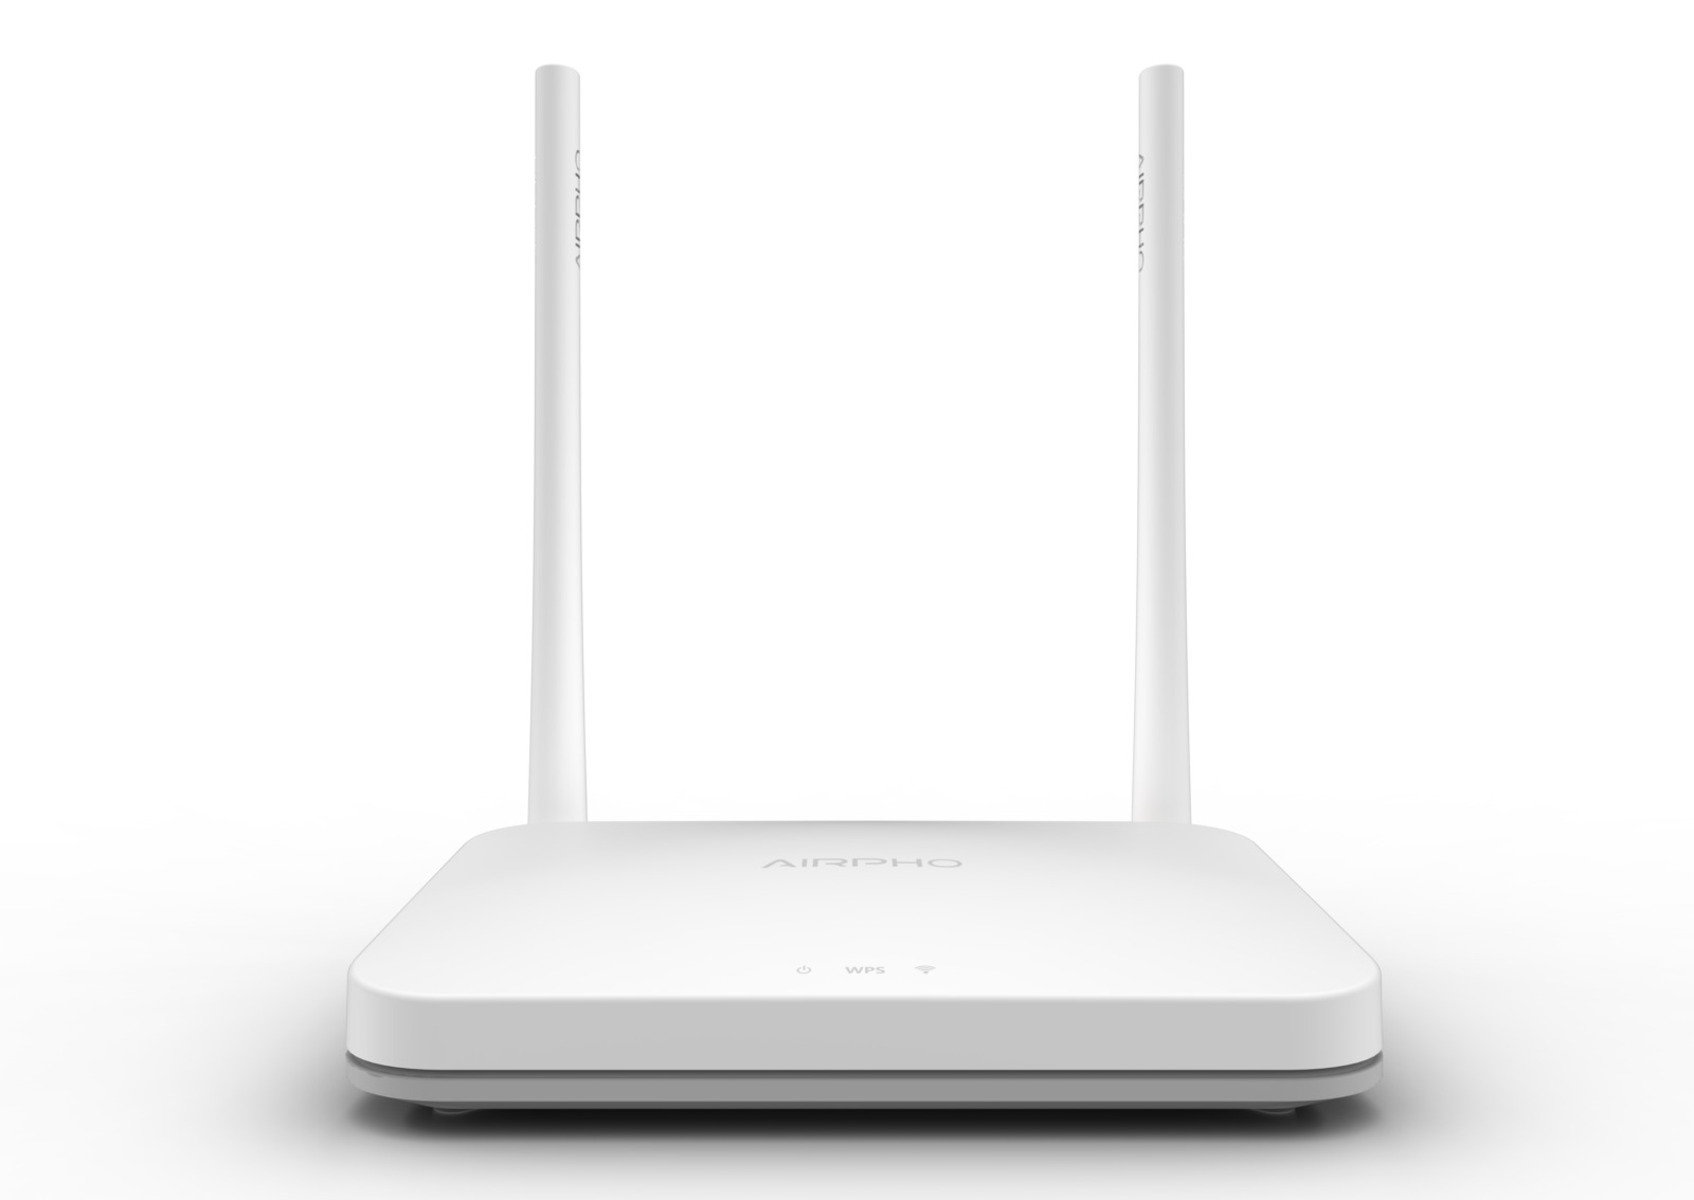 AIRPHO Mbit/s WLAN AR-W200 300 Router